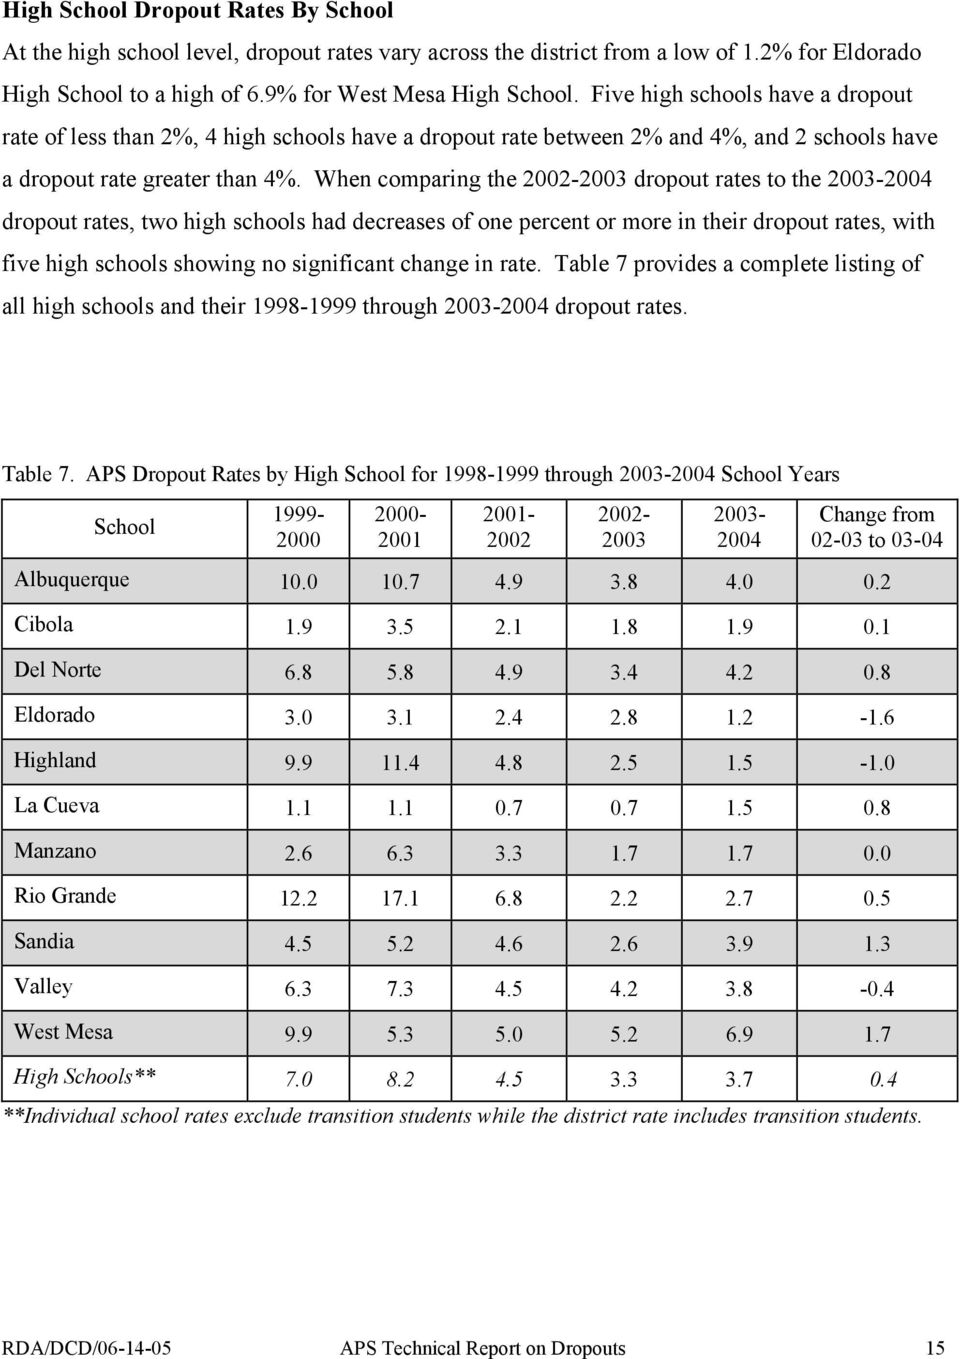 When comparing the 2002-2003 dropout rates to the 2003-2004 dropout rates, two high schools had decreases of one percent or more in their dropout rates, with five high schools showing no significant